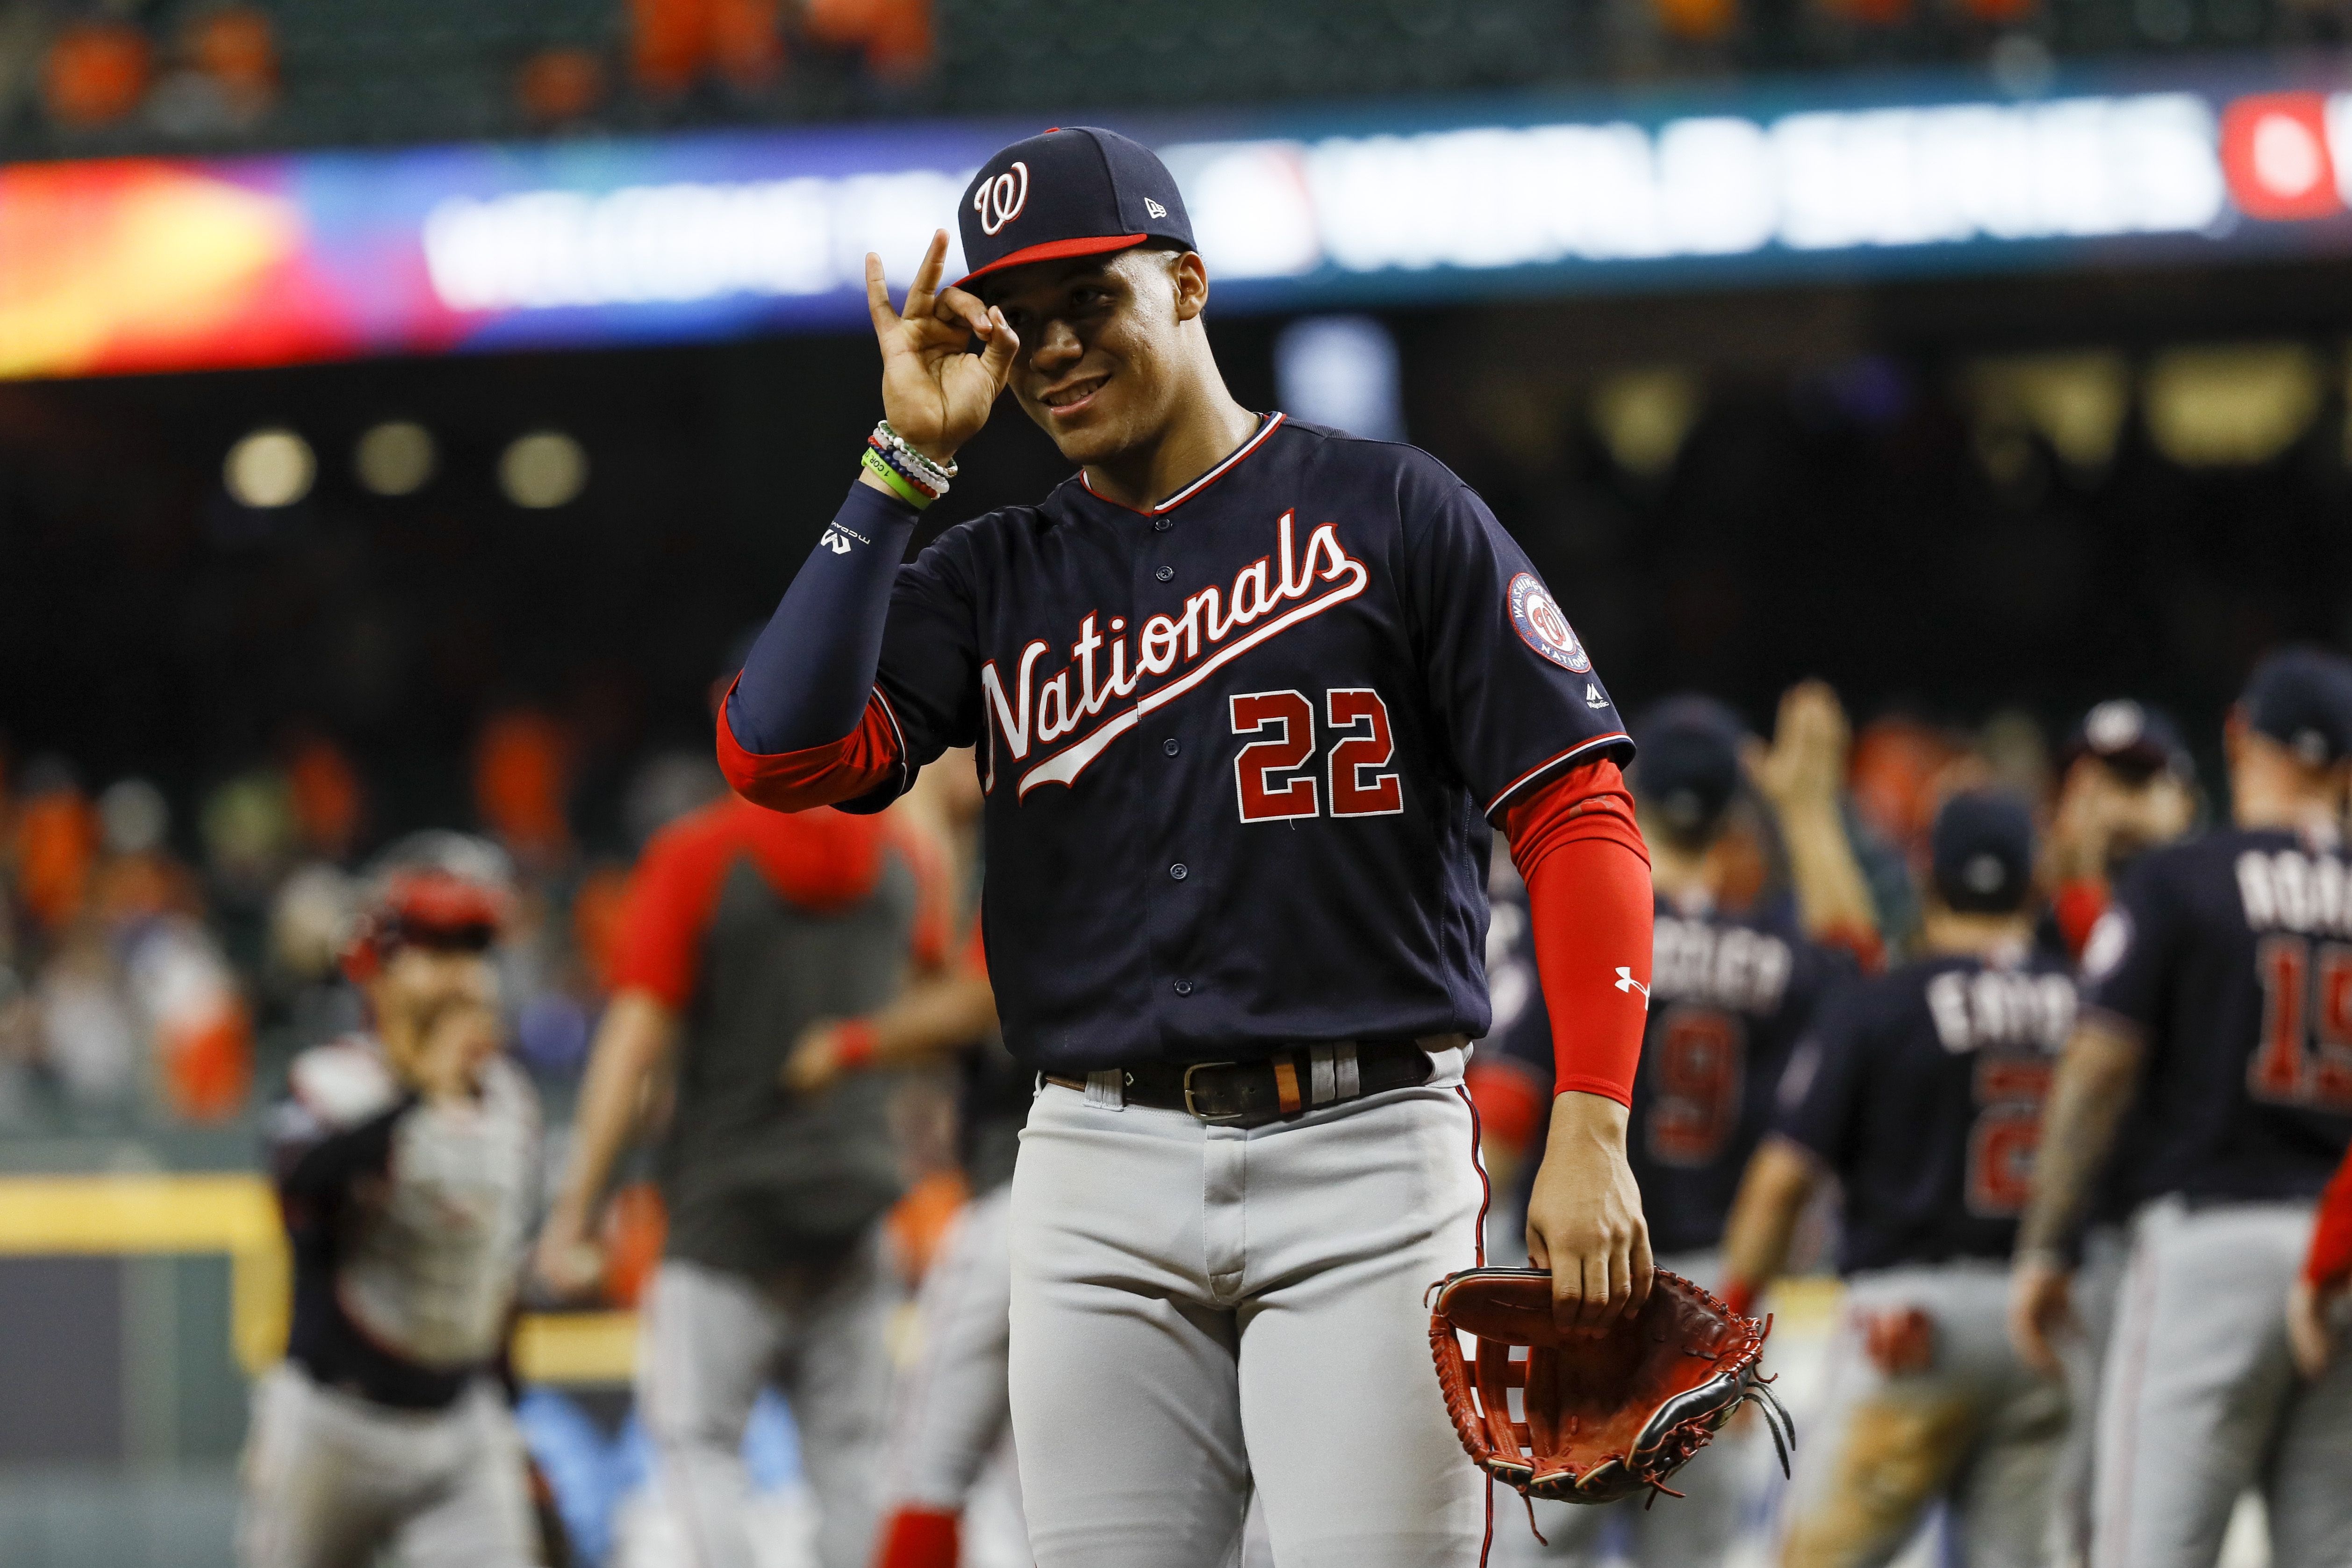 That Washington Nationals World Series win? Latinos helped do that